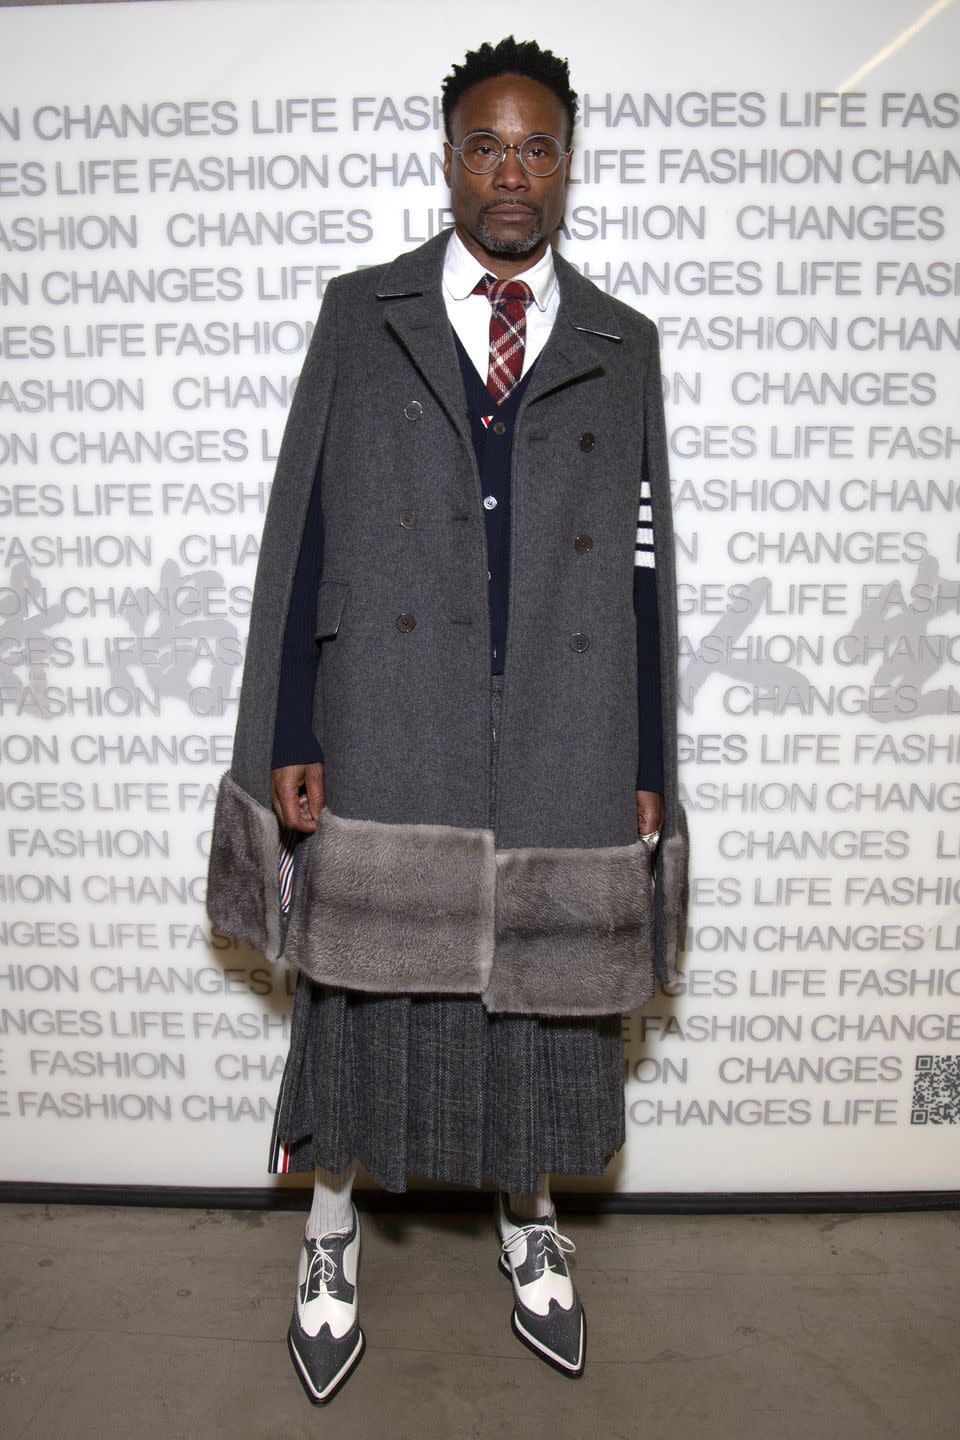 13) Billy Porter at Fashion Changes Lives